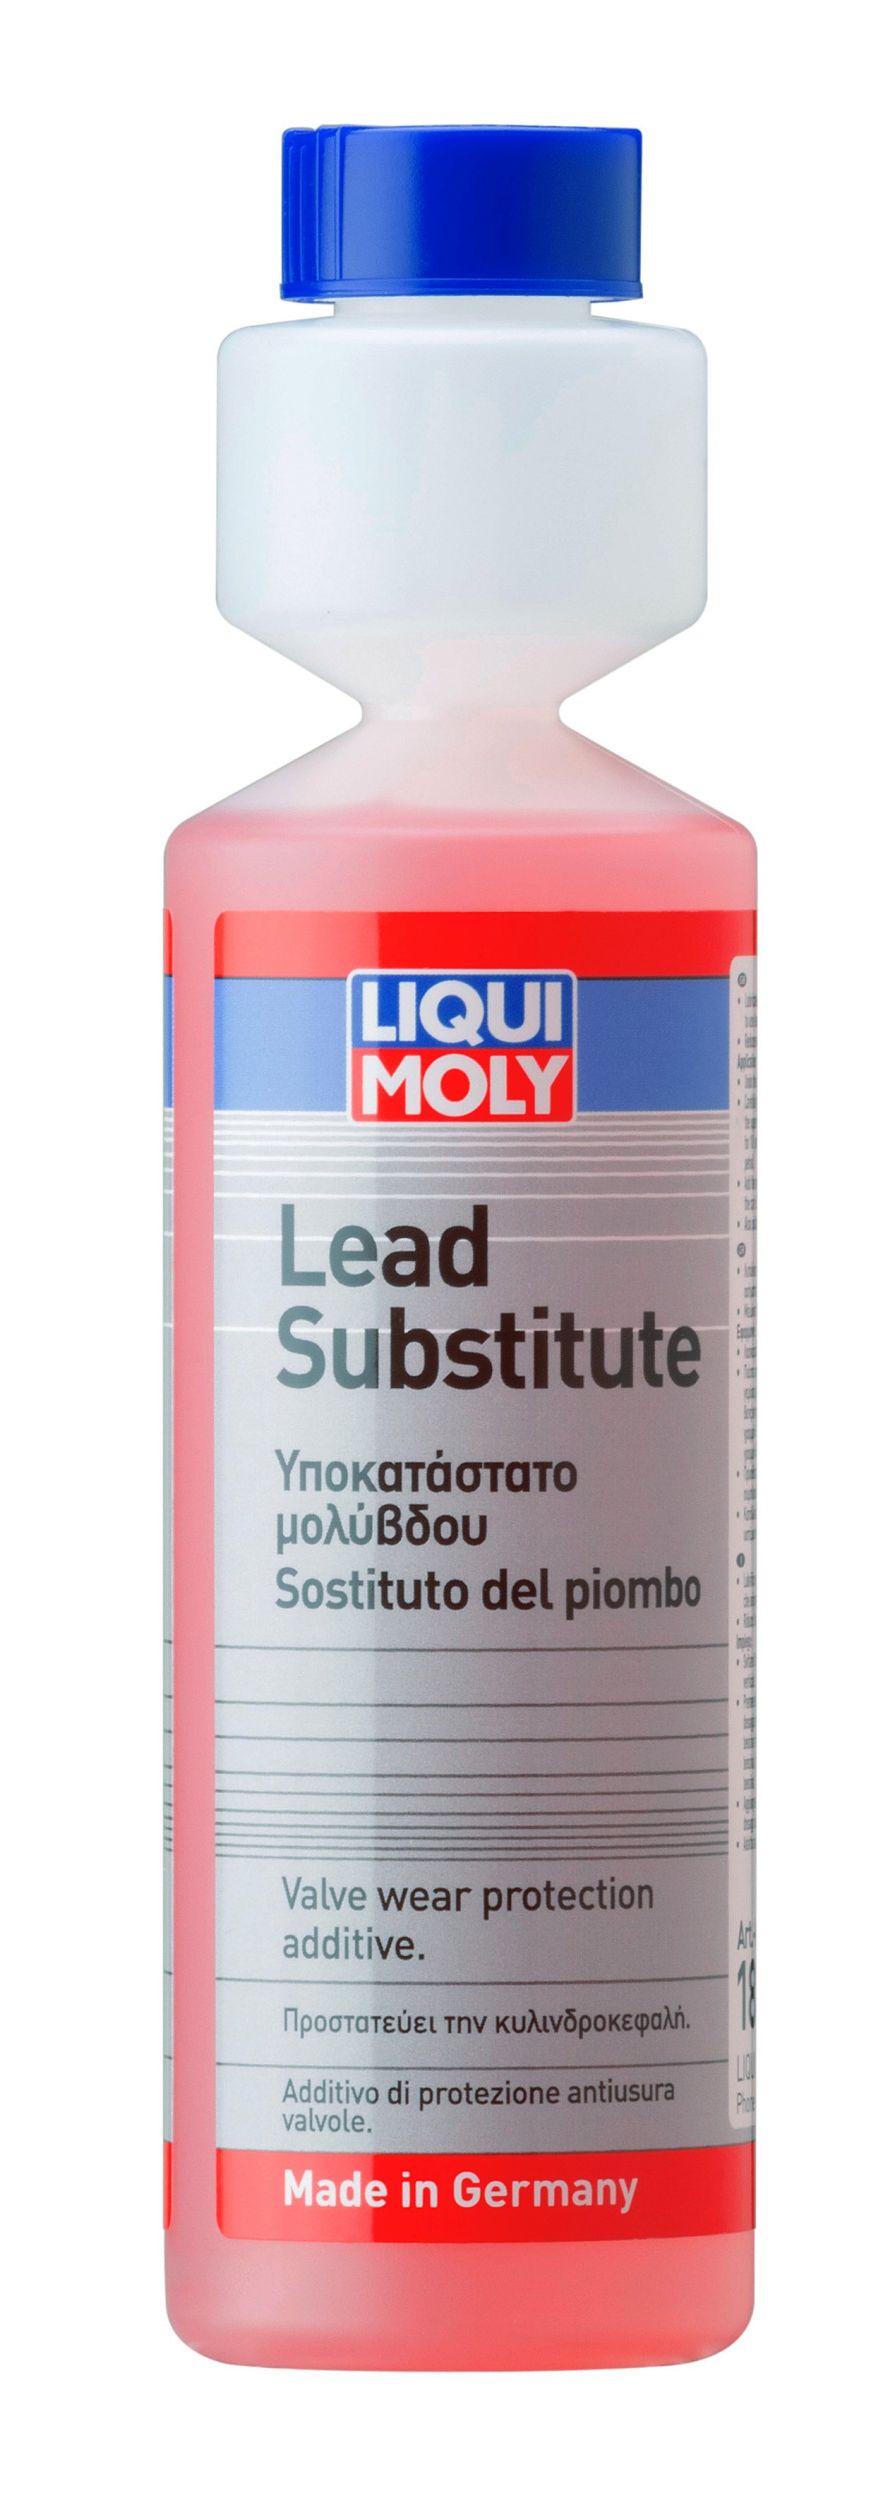 Picture of Liqui Moly Lead Substitute - Lead